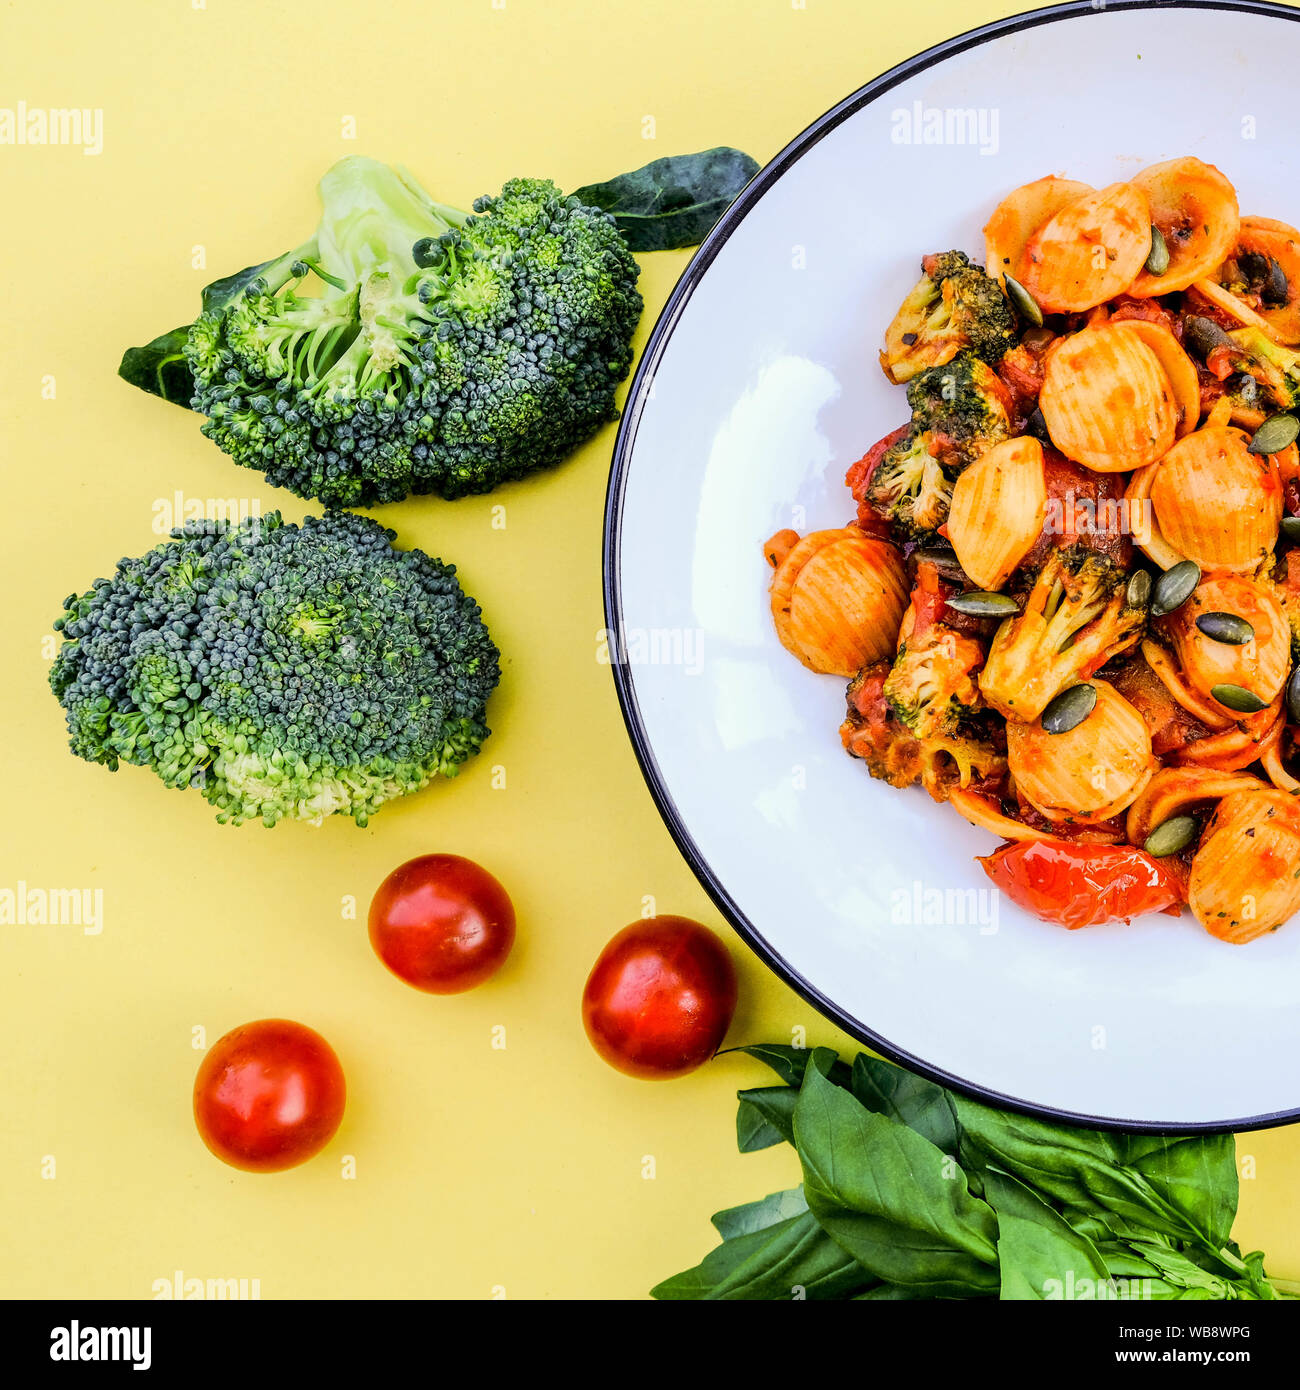 Italian Style Broccoli Orecchiette Pasta Vegetarian Meal With Sundried Tomatoes and Black Olives Stock Photo